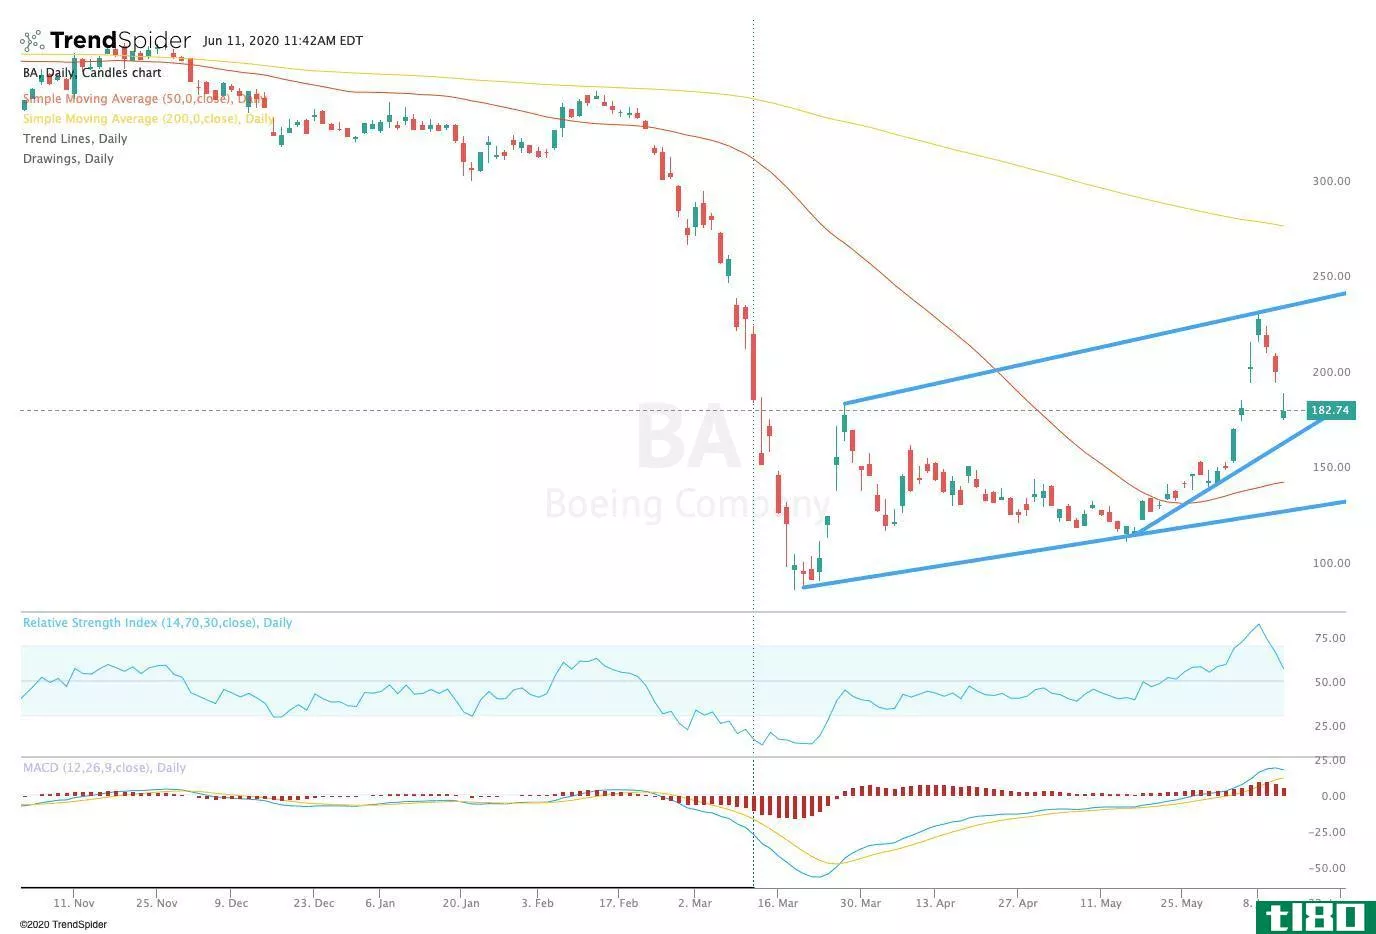 Chart showing the share price performance of The Boeing Company (BA)